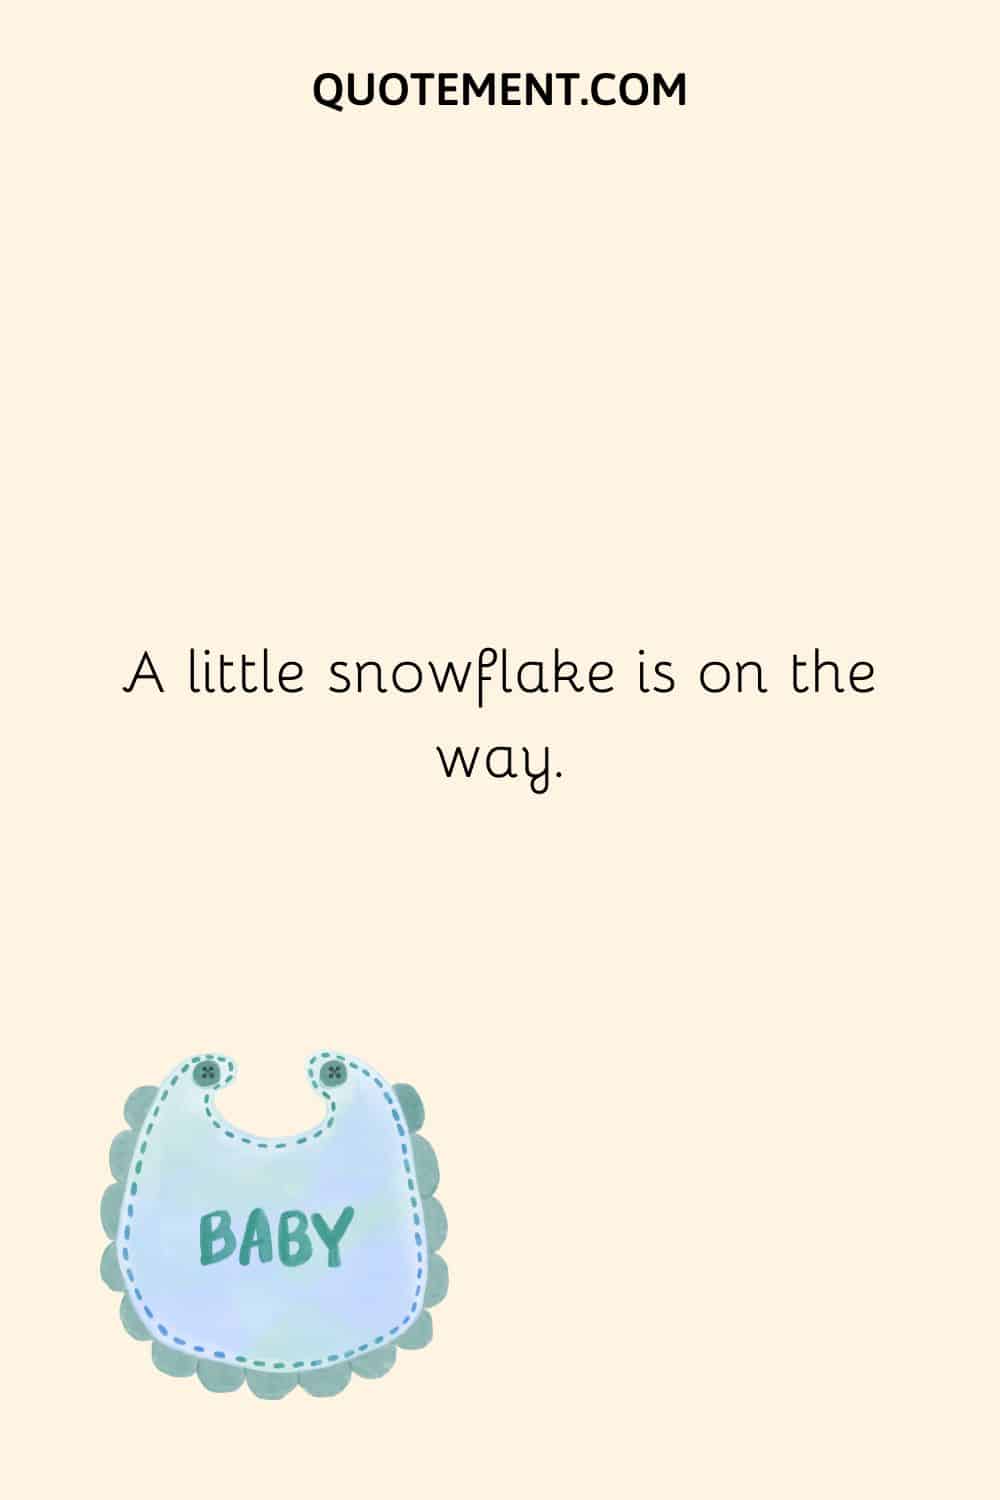 A little snowflake is on the way.